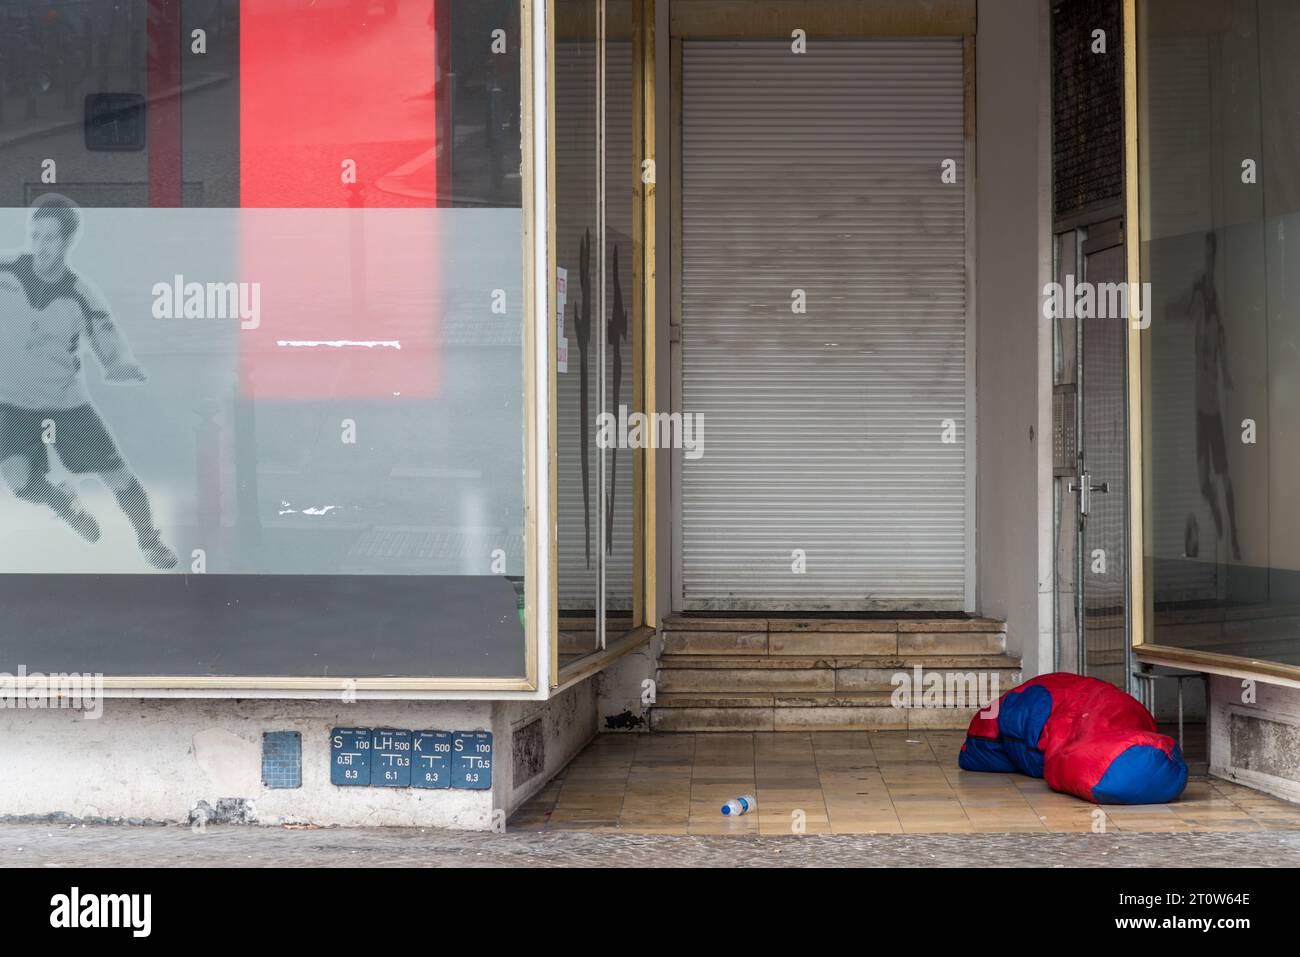 A sleeping bag of a homeless person in a house entrance Stock Photo